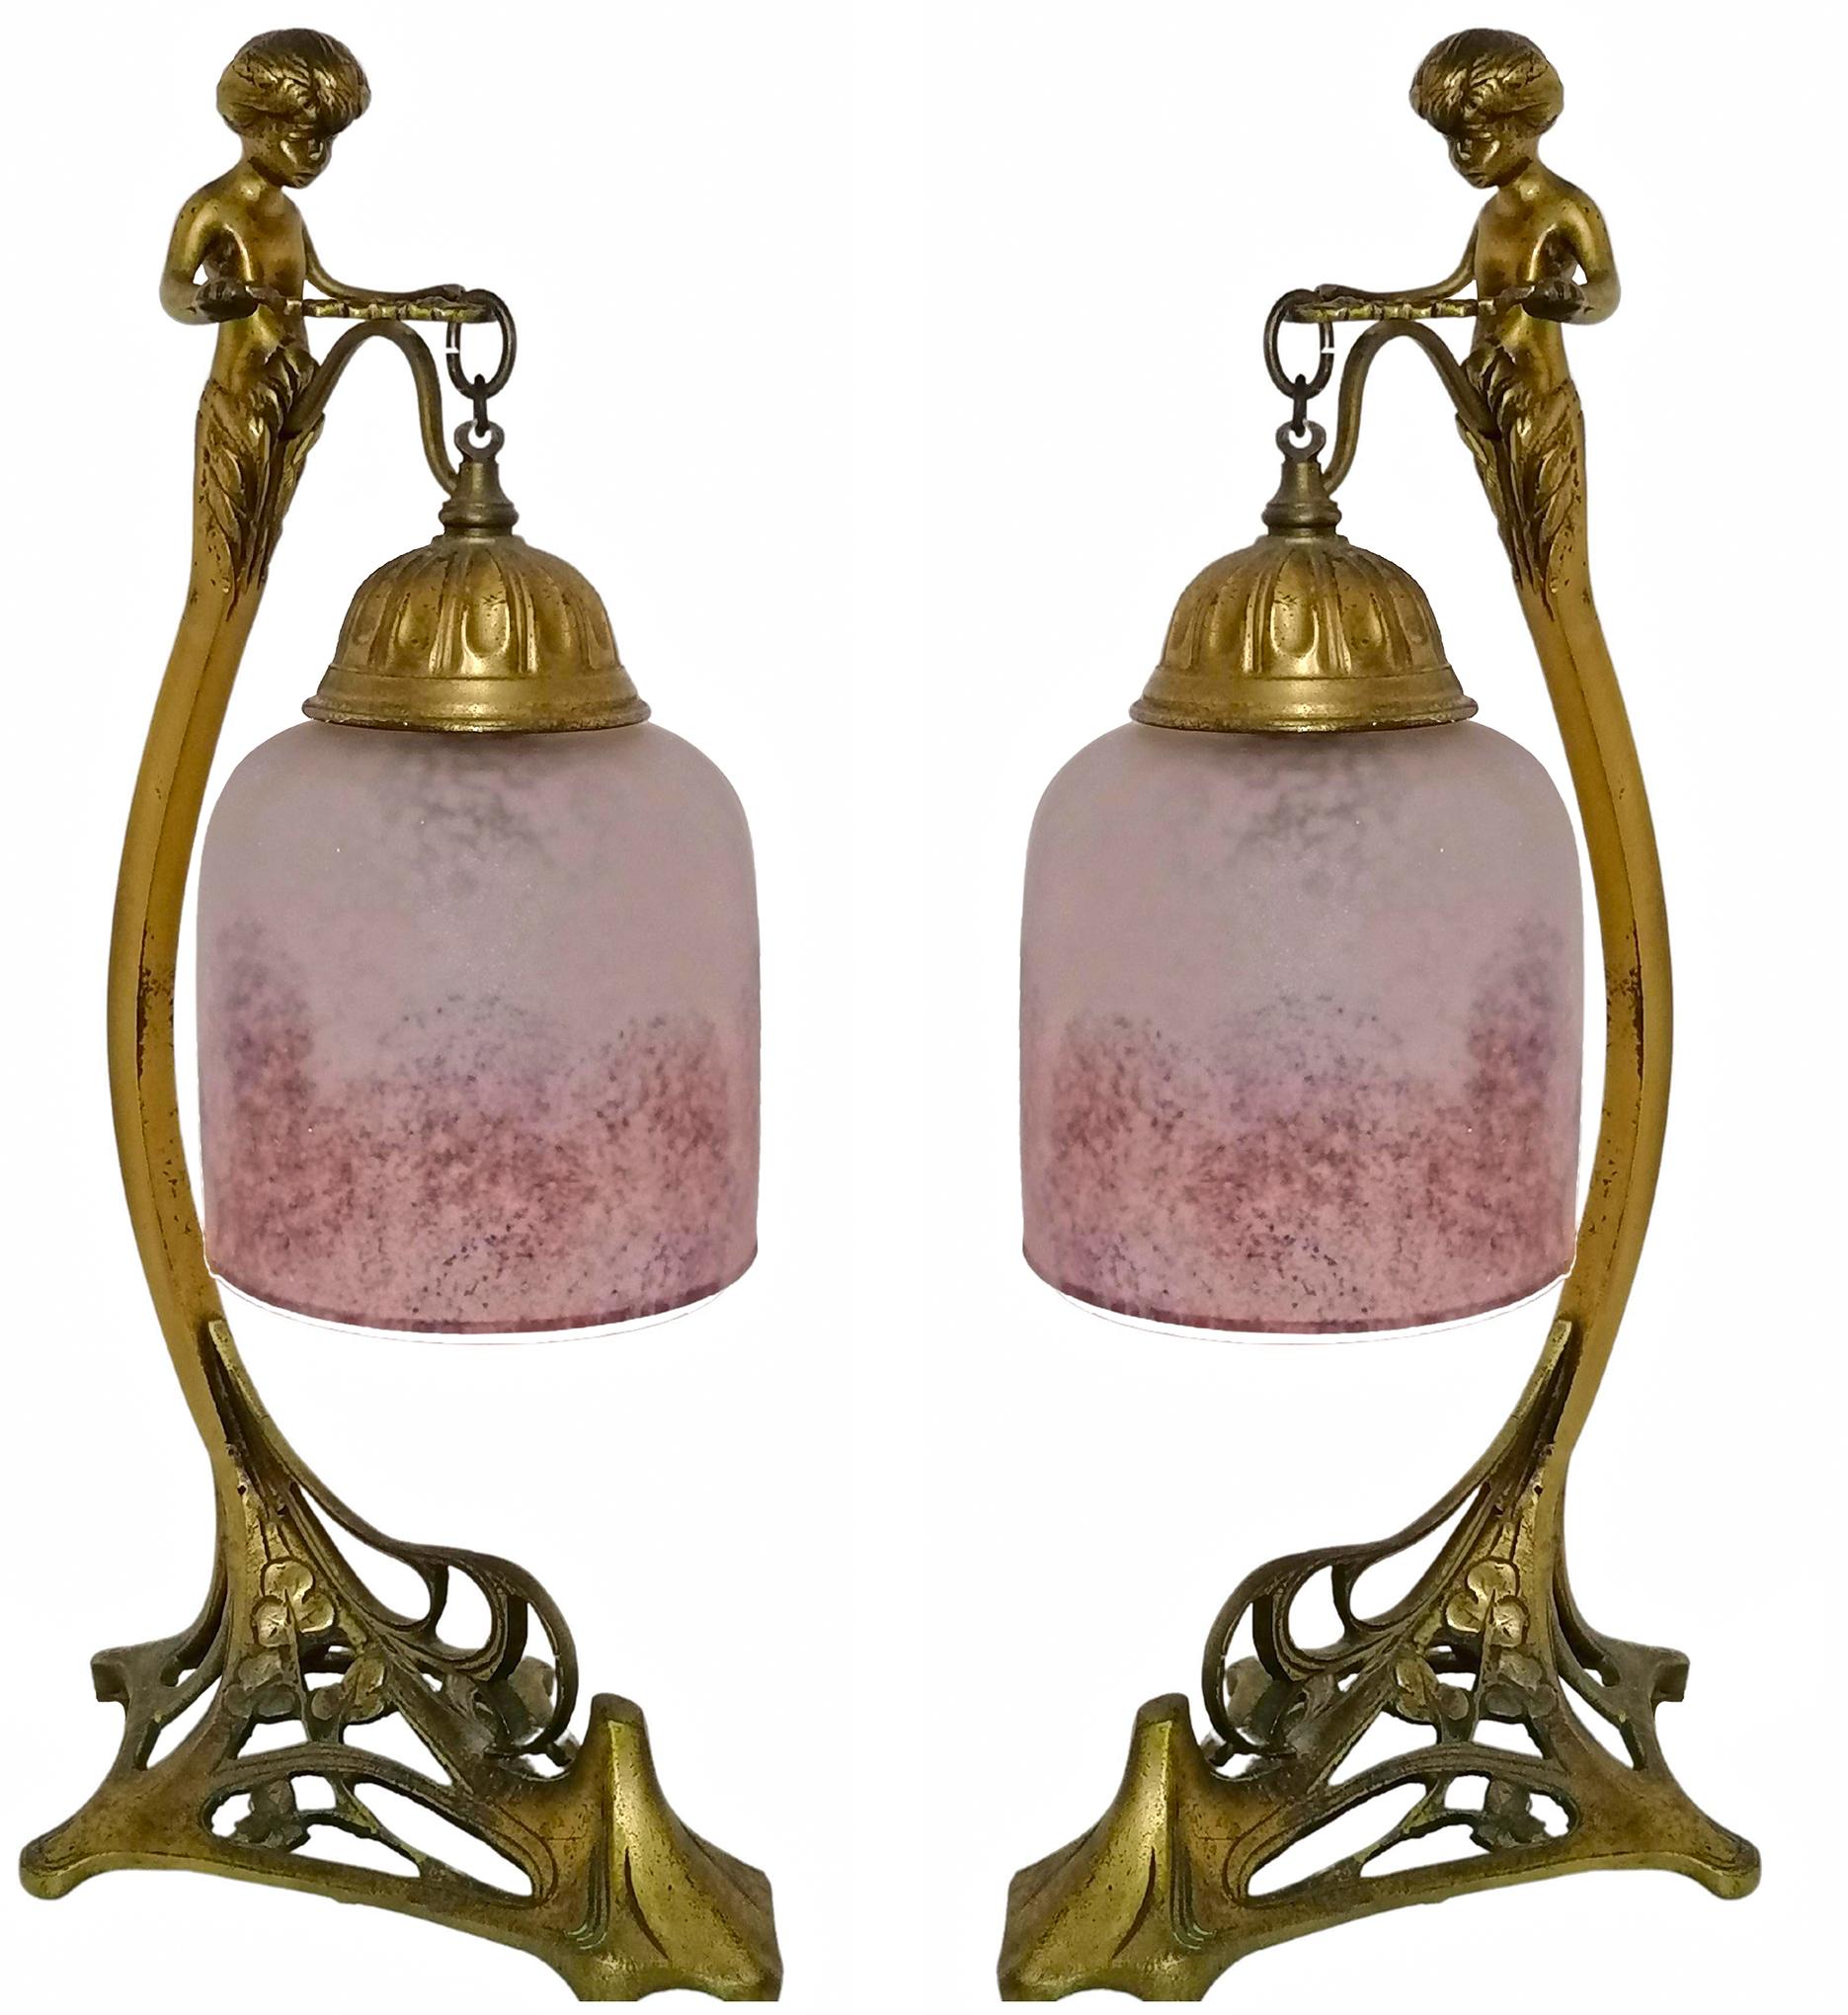 Gorgeous pair of antique French Art Nouveau and Art Deco table lamps. Ornate engraved bronze and frosted pink art glass lamp shades.
Dimensions
Height: 15.36 in. (39 cm)
Width: 5.91 in. (15 cm)
Depth: 8.27 in. (21 cm)
Age patina
2-light bulbs